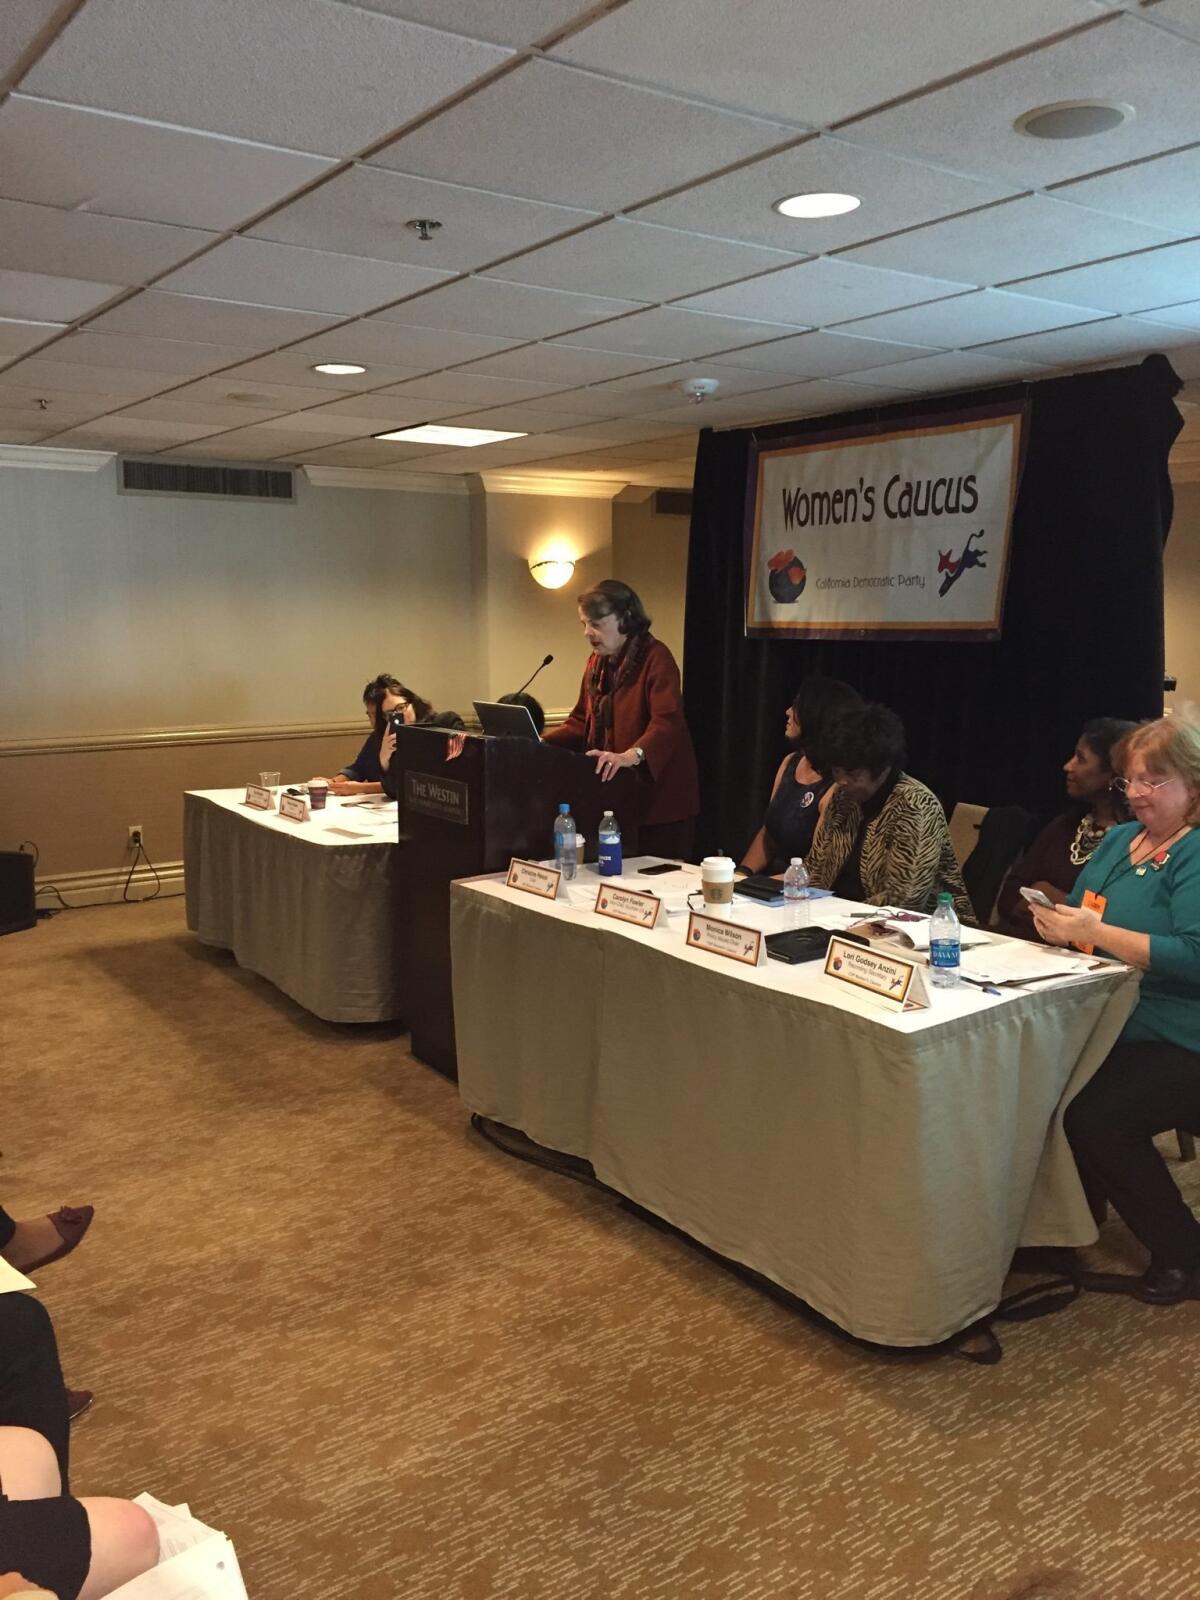 Sen. Dianne Feinstein (D-Calif.) speaks to the Women’s Caucus at the California Democratic Party Executive Board meeting in Millbrae.